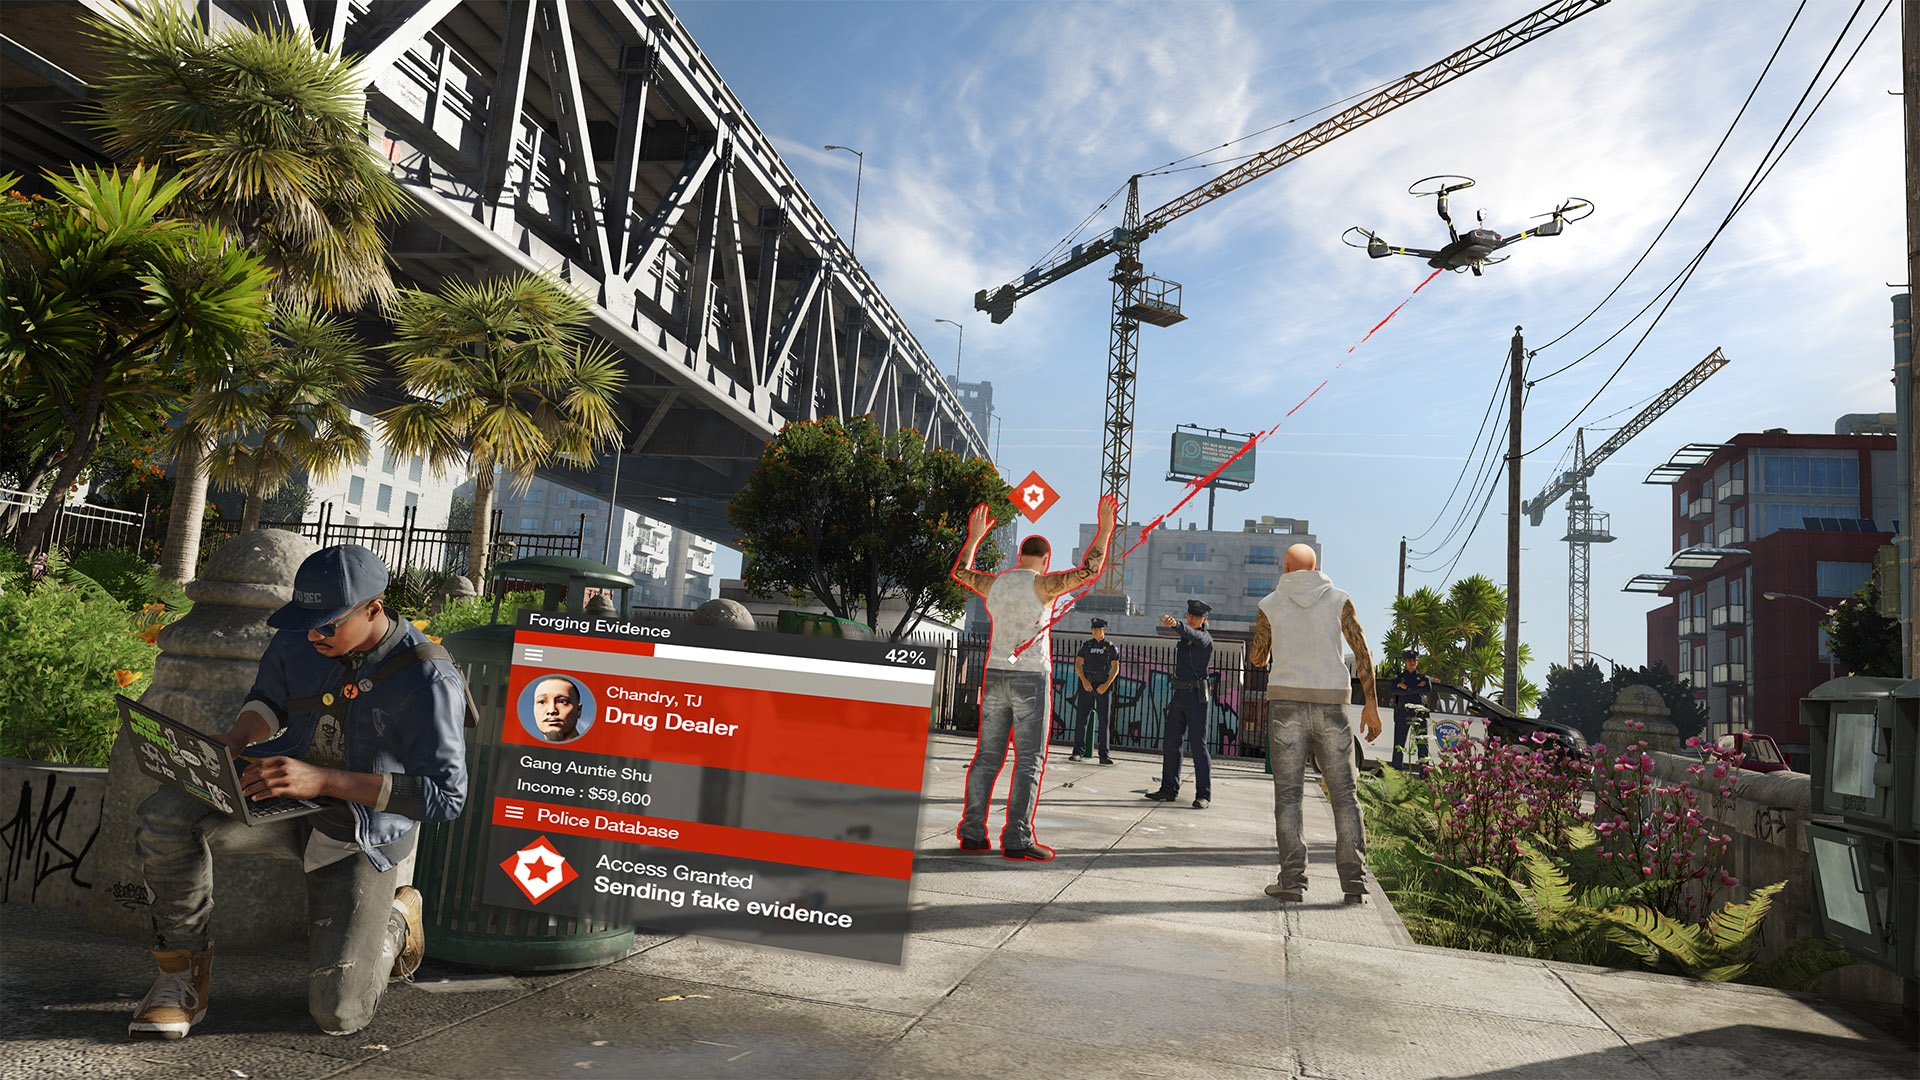 Ubisoft is giving away 'Watch Dogs 2' on PC this weekend | Engadget